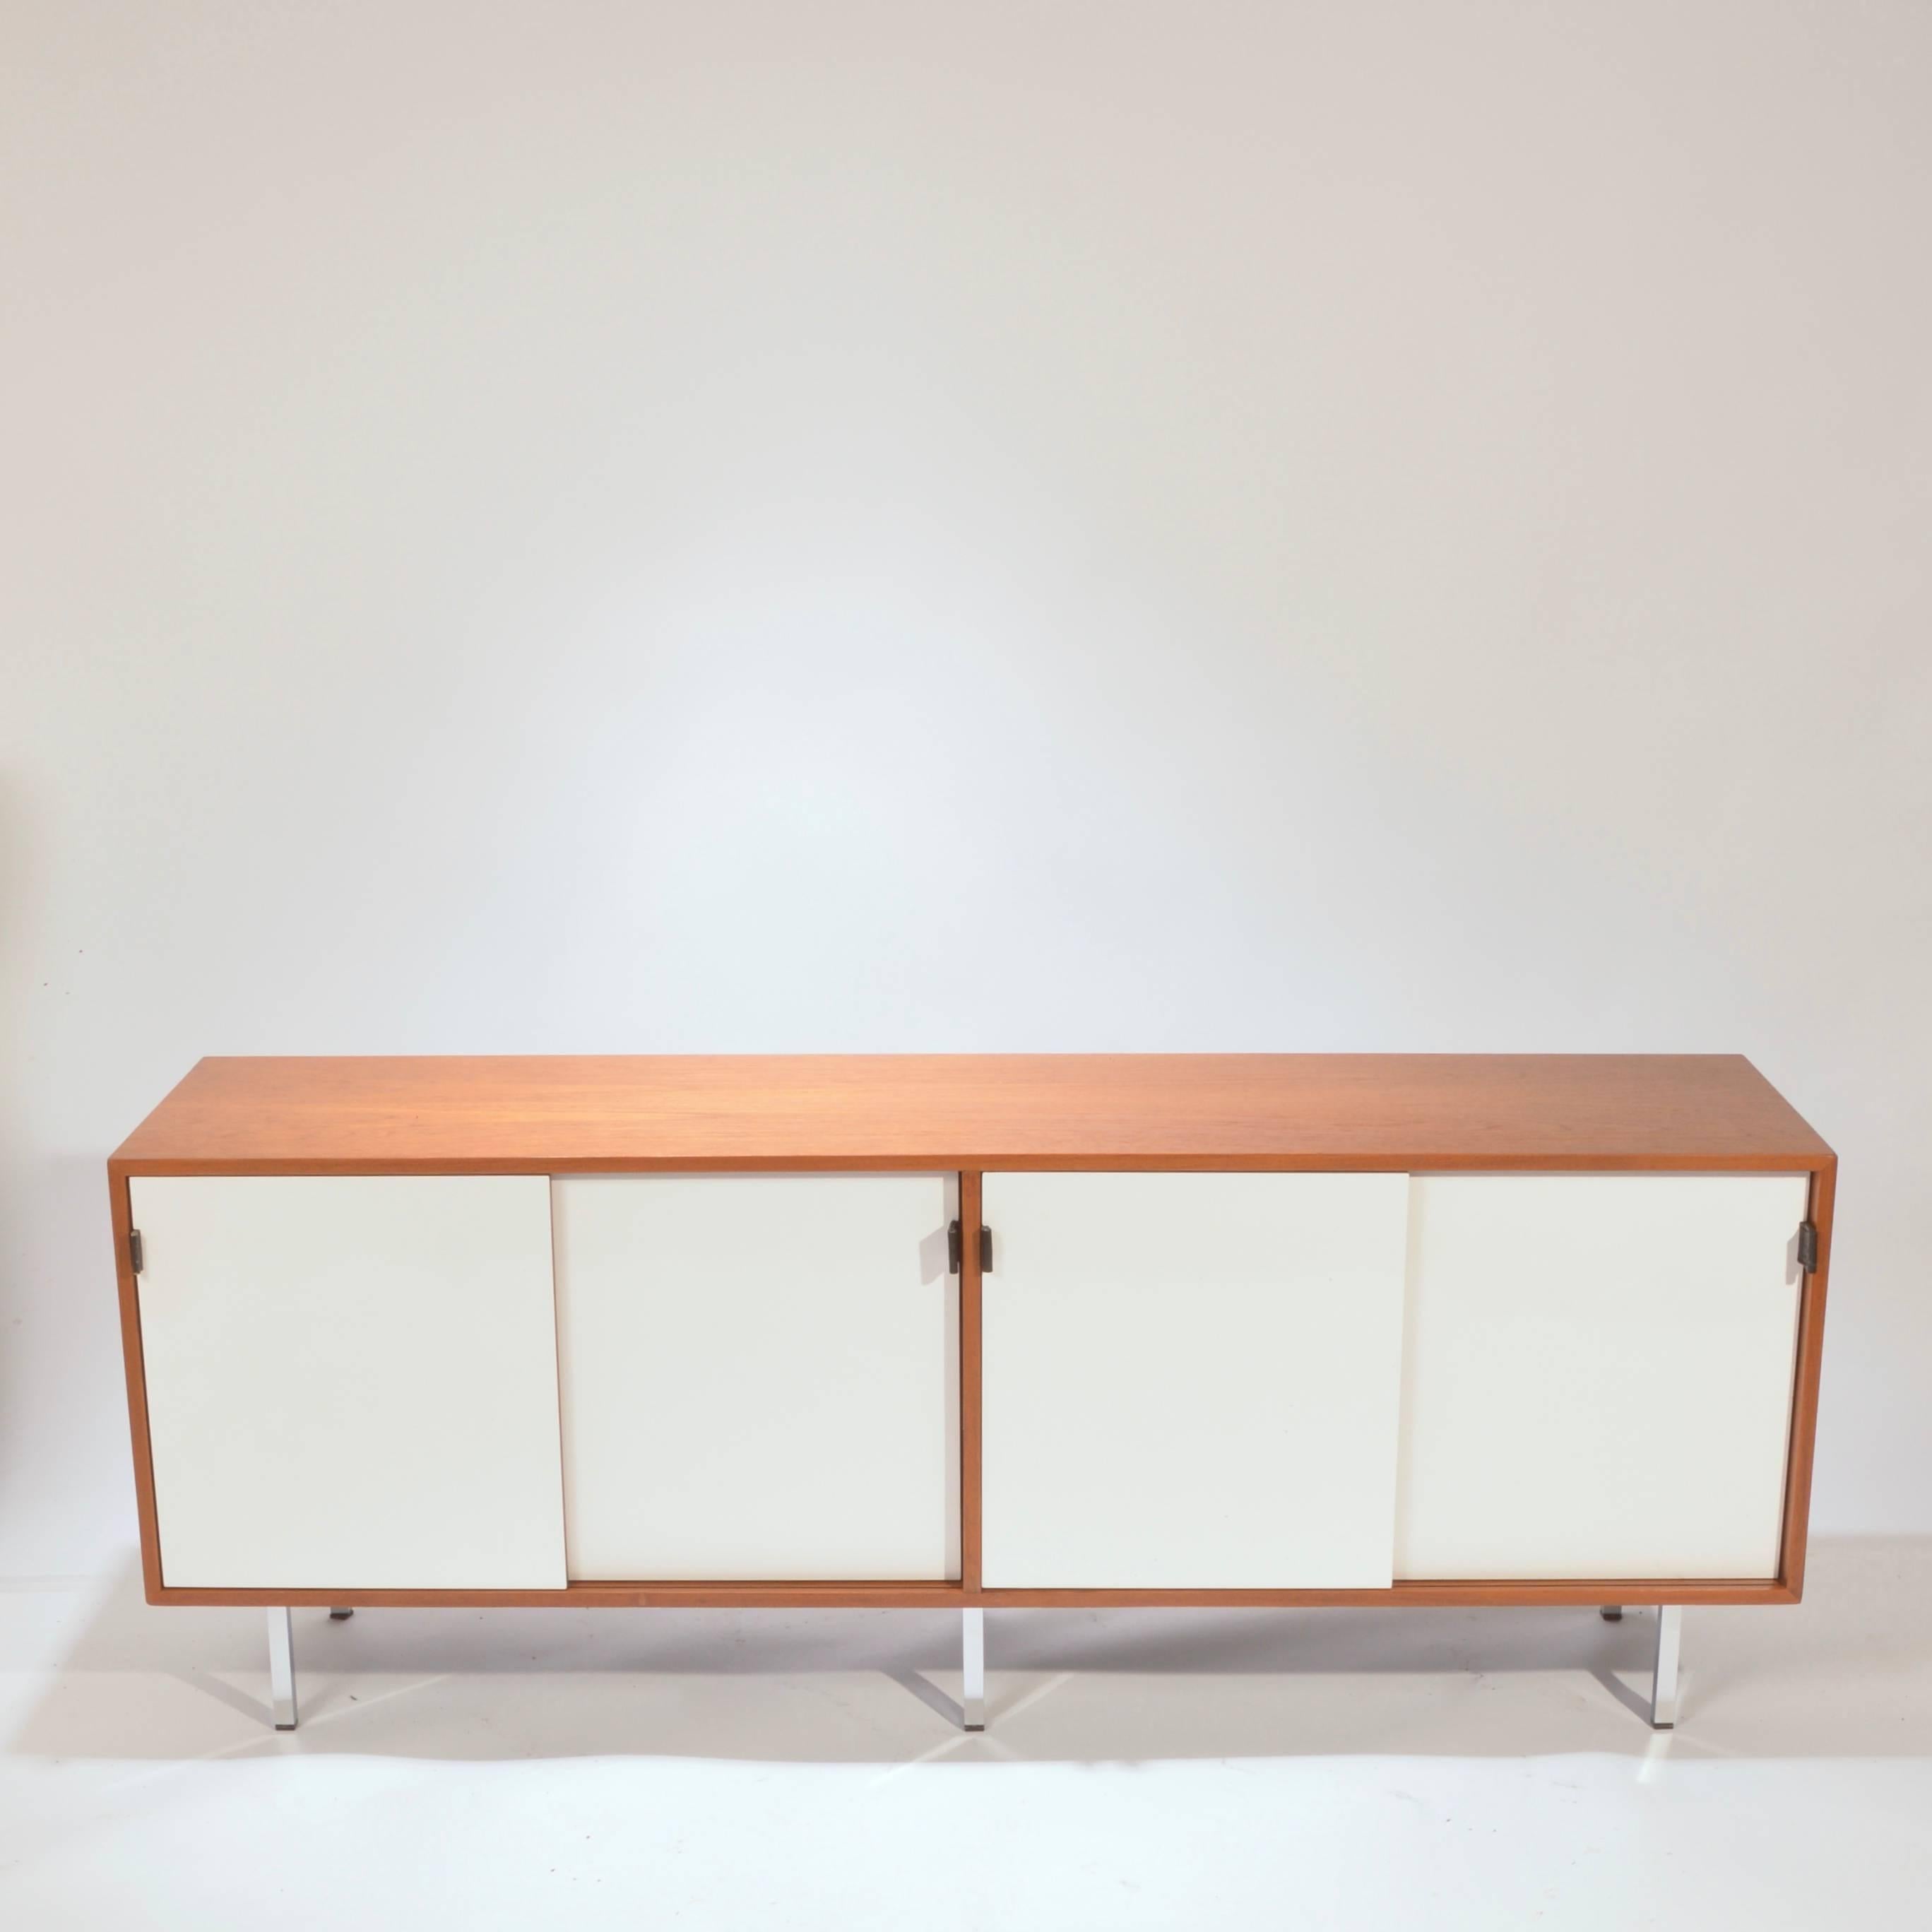 This is a fully restored early Florence Knoll credenza featuring new white Formica sliding doors, new professional lacquer finish, leather pulls, chrome legs and solid oak drawers. We have six in stock and can offer a range of interior options such